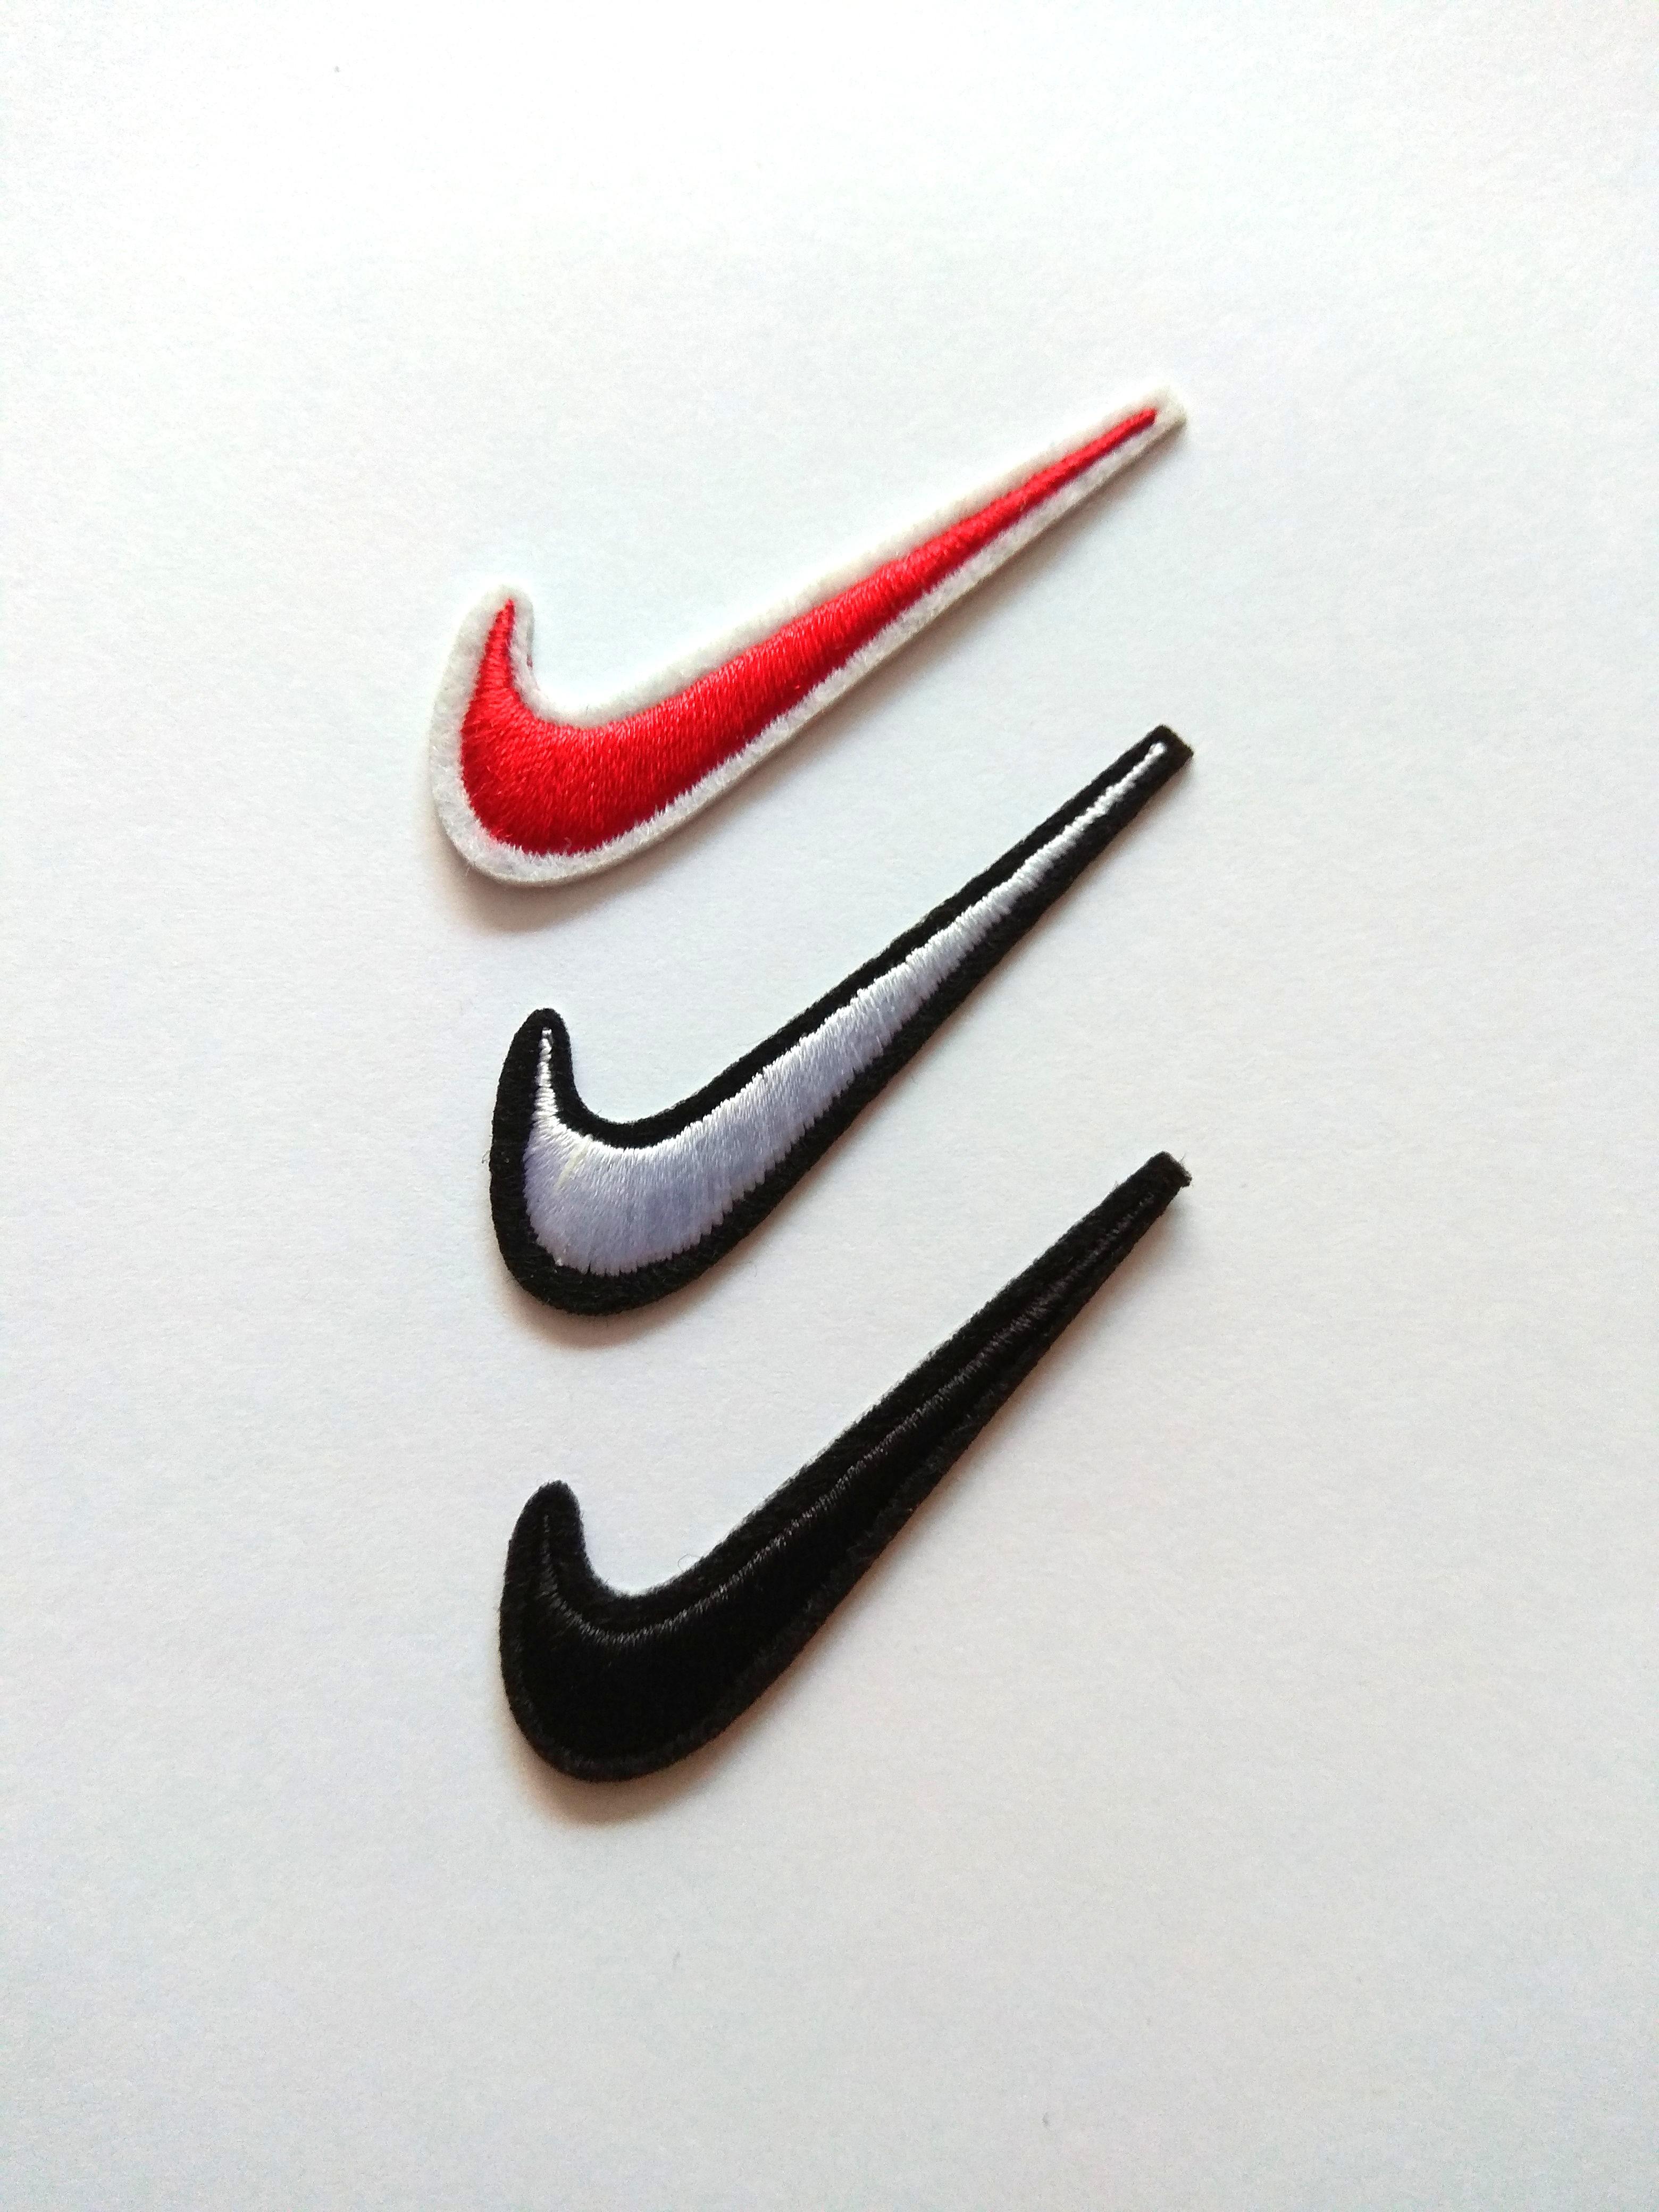 custom nike patches